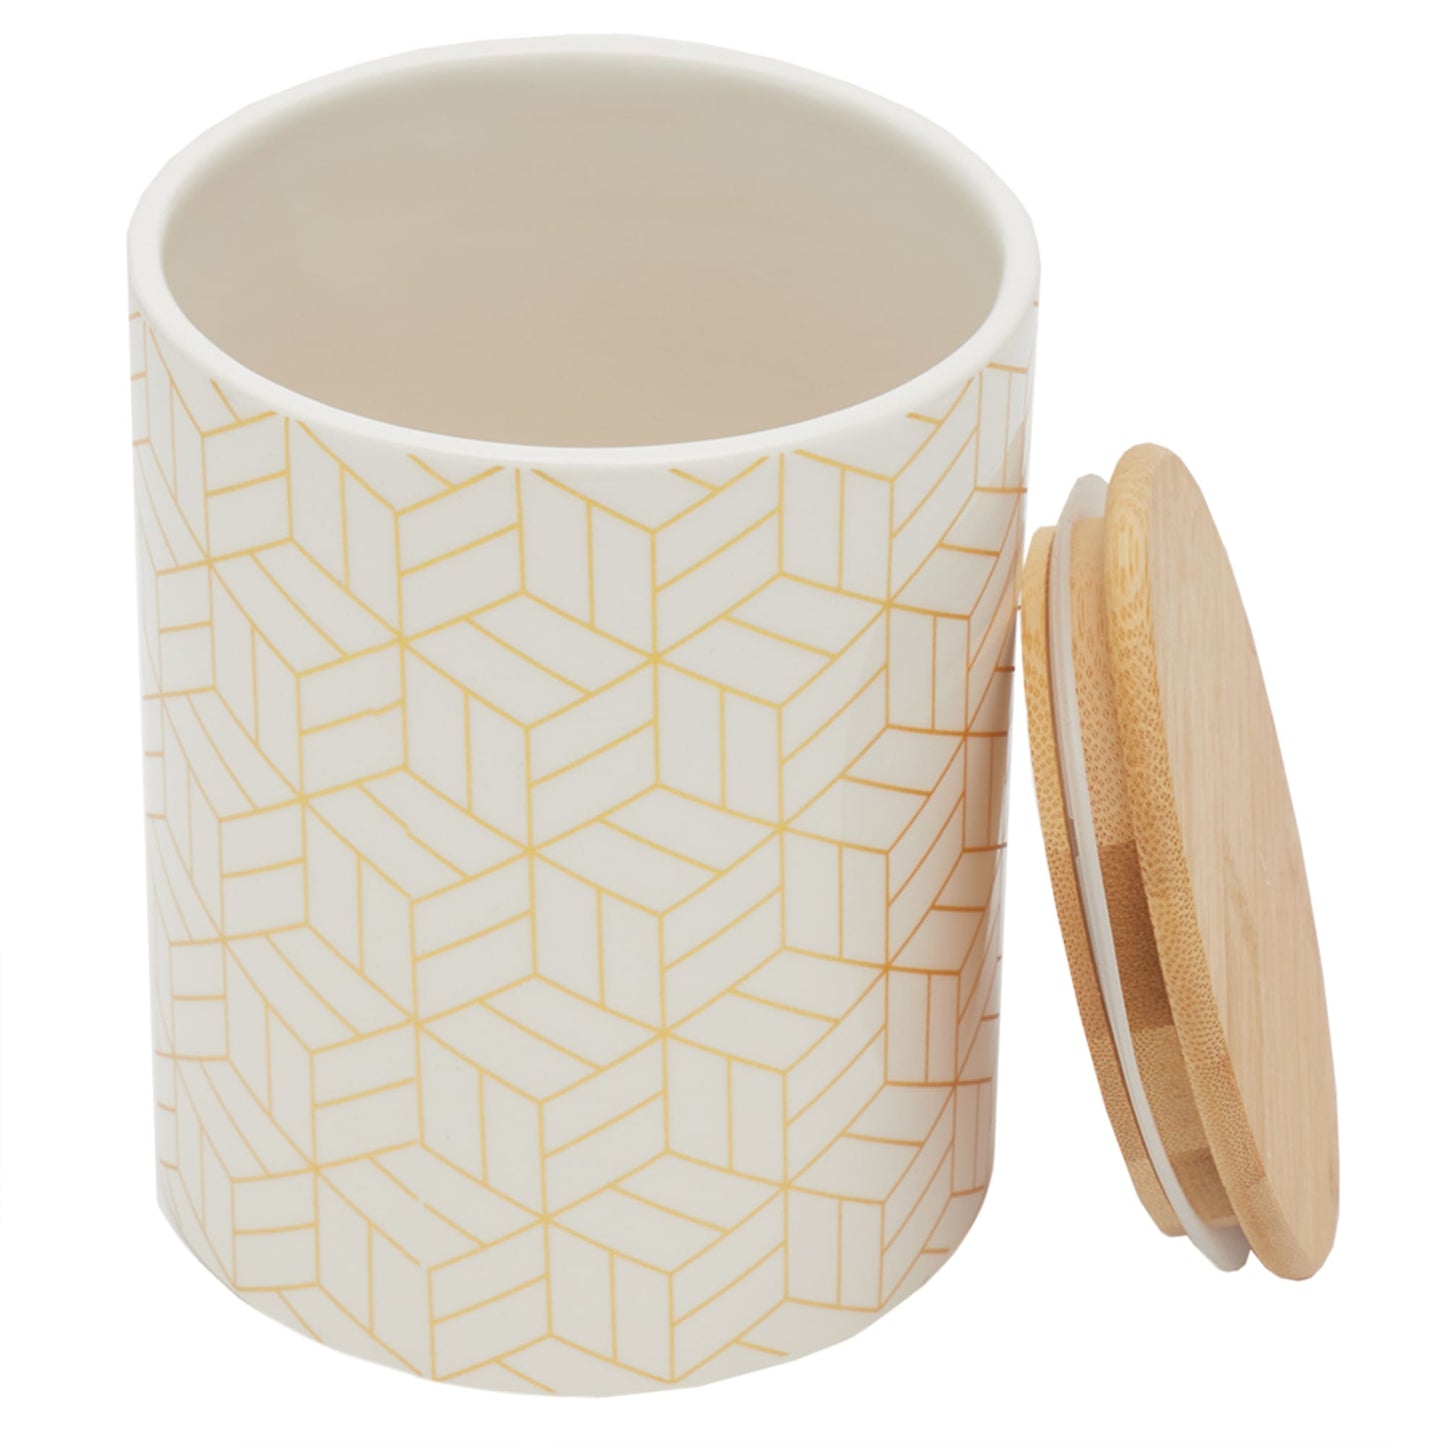 Cubix Large Ceramic Canister with Bamboo Top